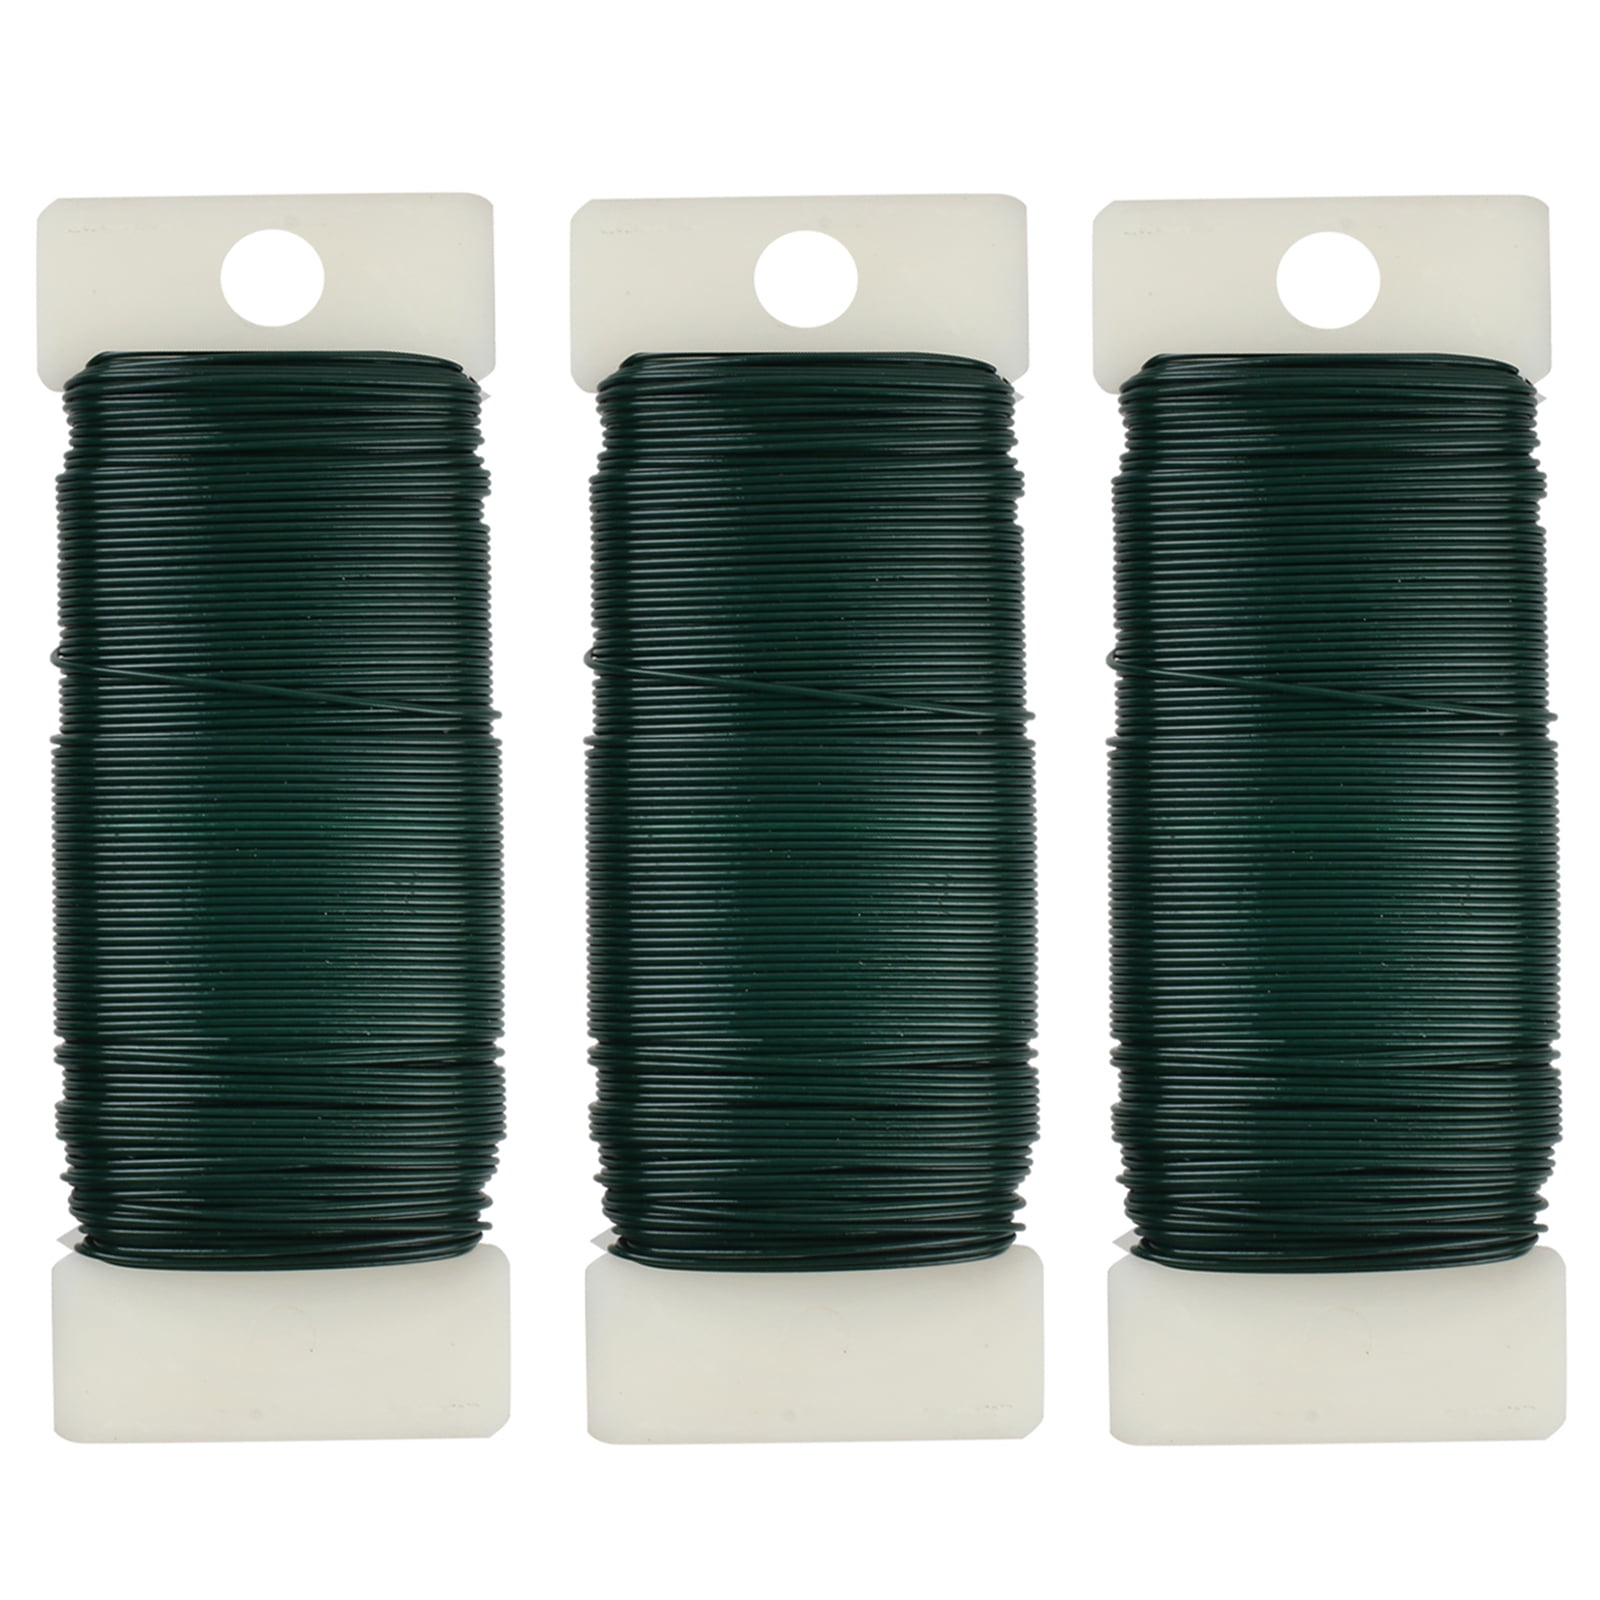 22gauge green paper covered wire fondant cake accessory wire florist wire  120pieces - AliExpress